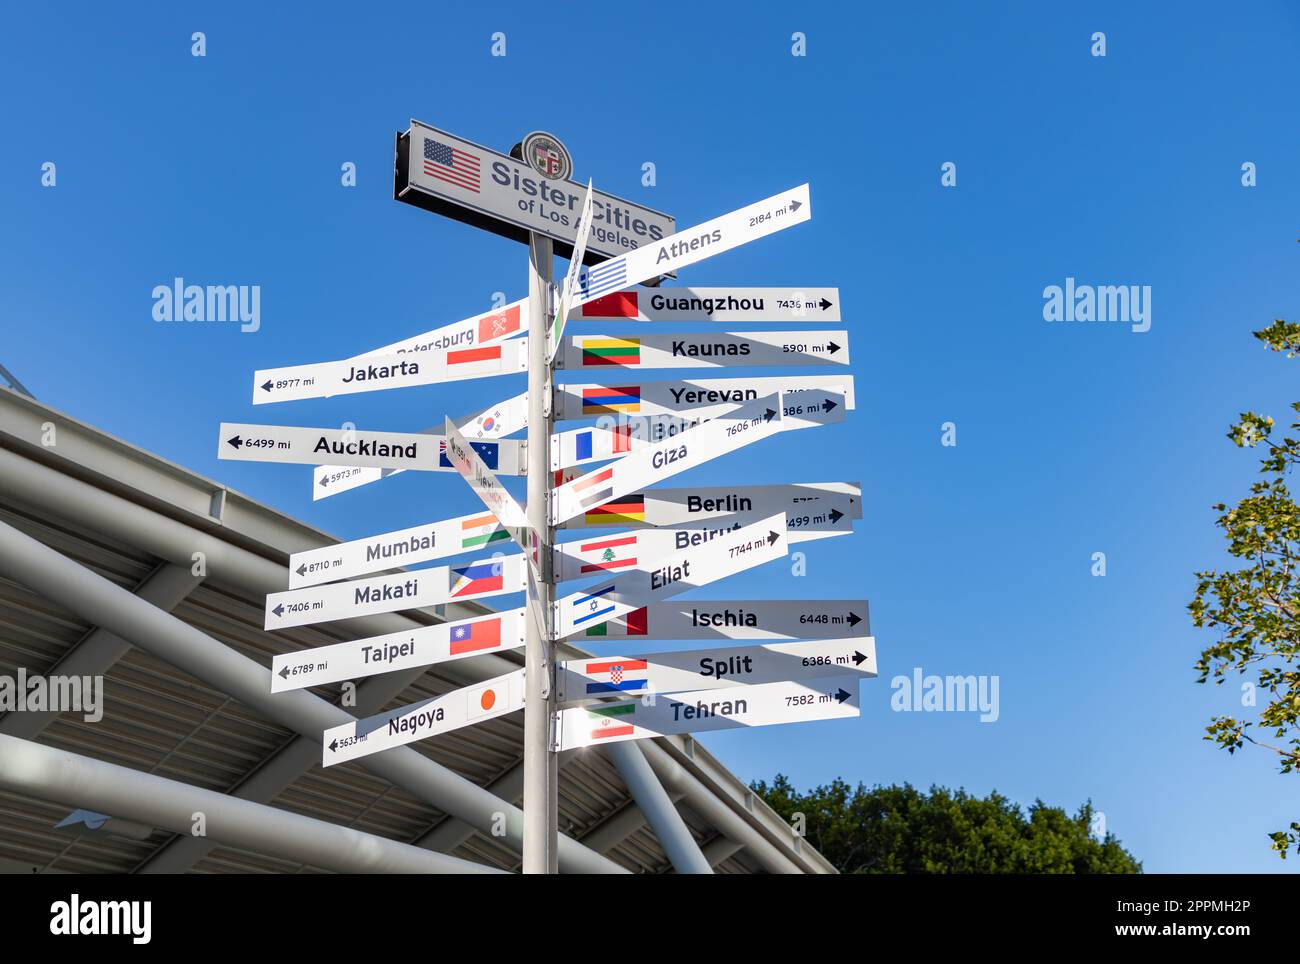 Los Angeles Sister Cities Directions Stock Photo